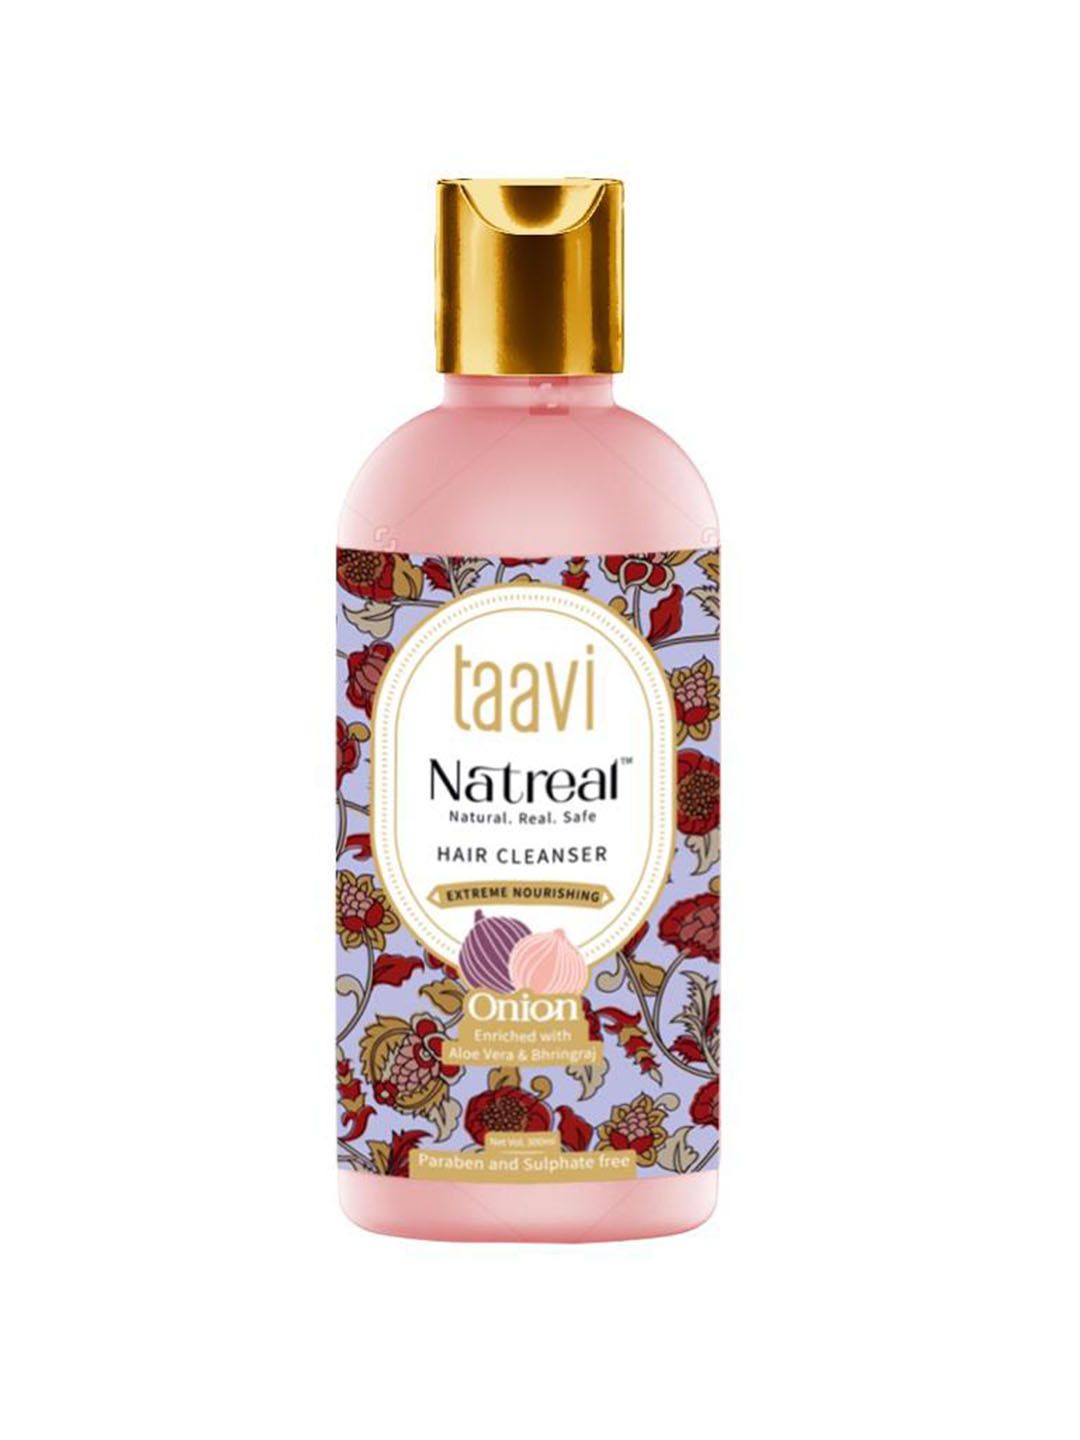 Taavi Unisex Natreal Onion Hair Cleanser 300 ml Price in India